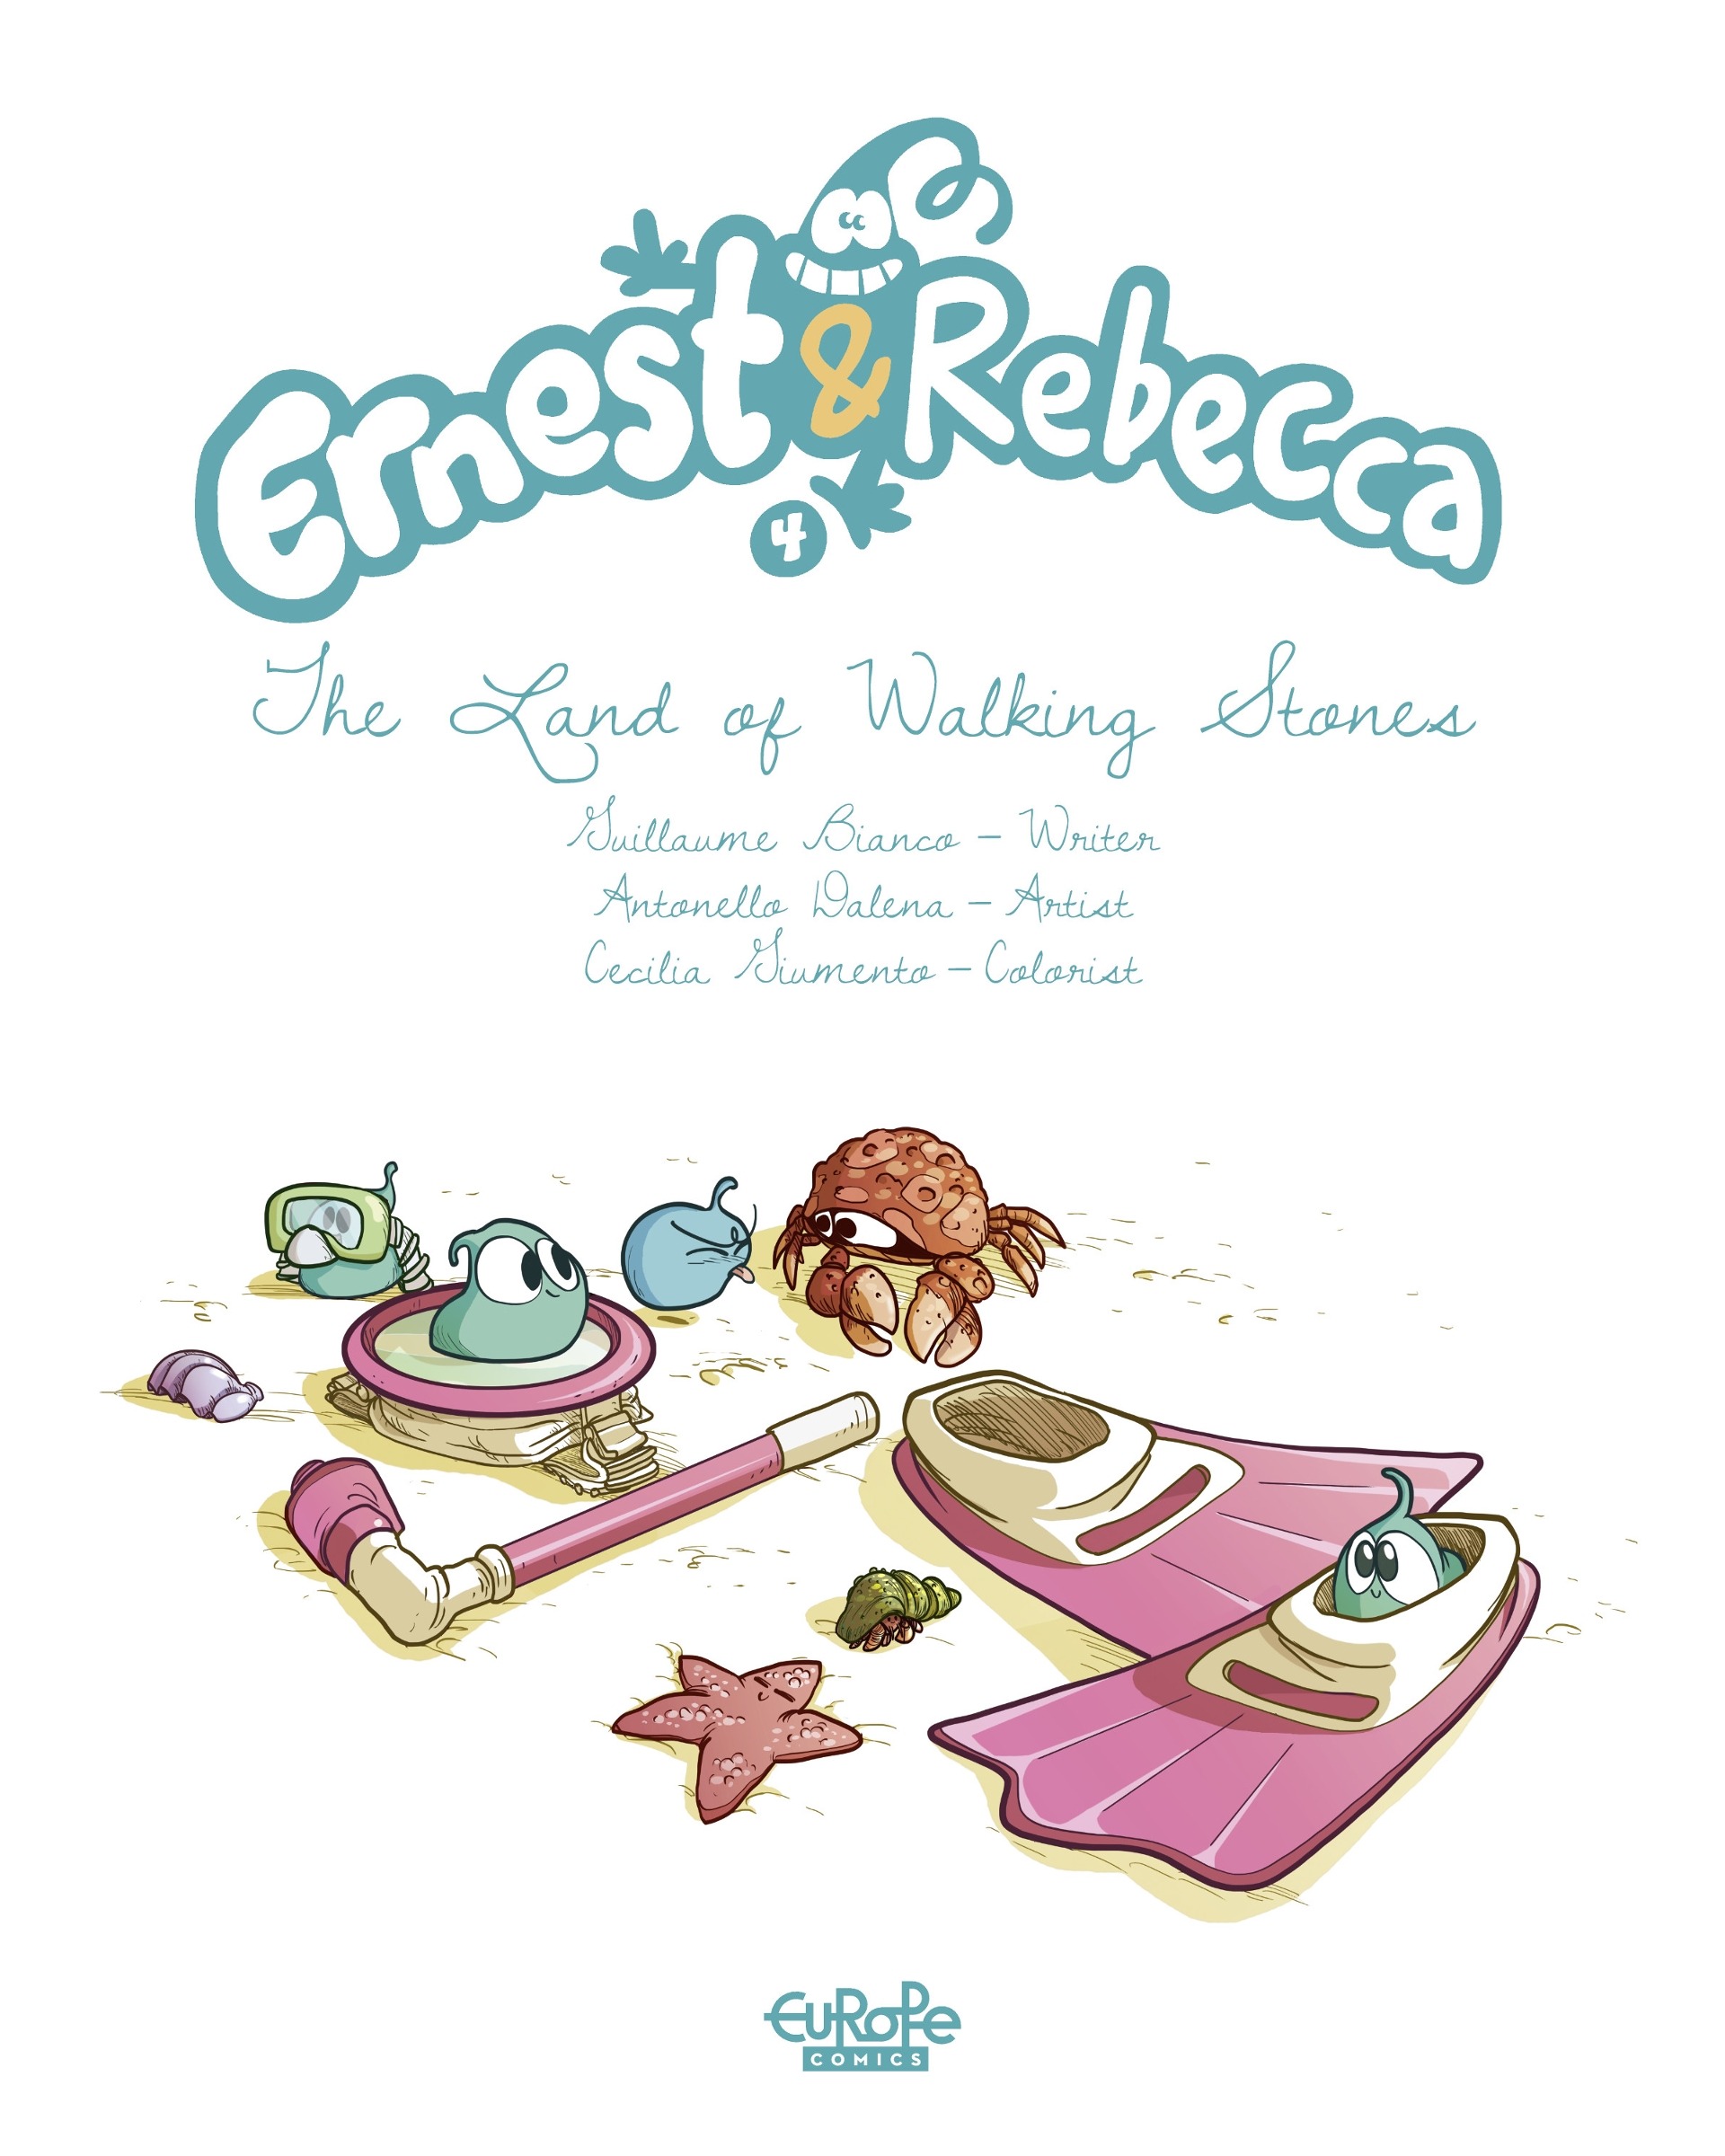 Read online Ernest & Rebecca comic -  Issue #4 - 3